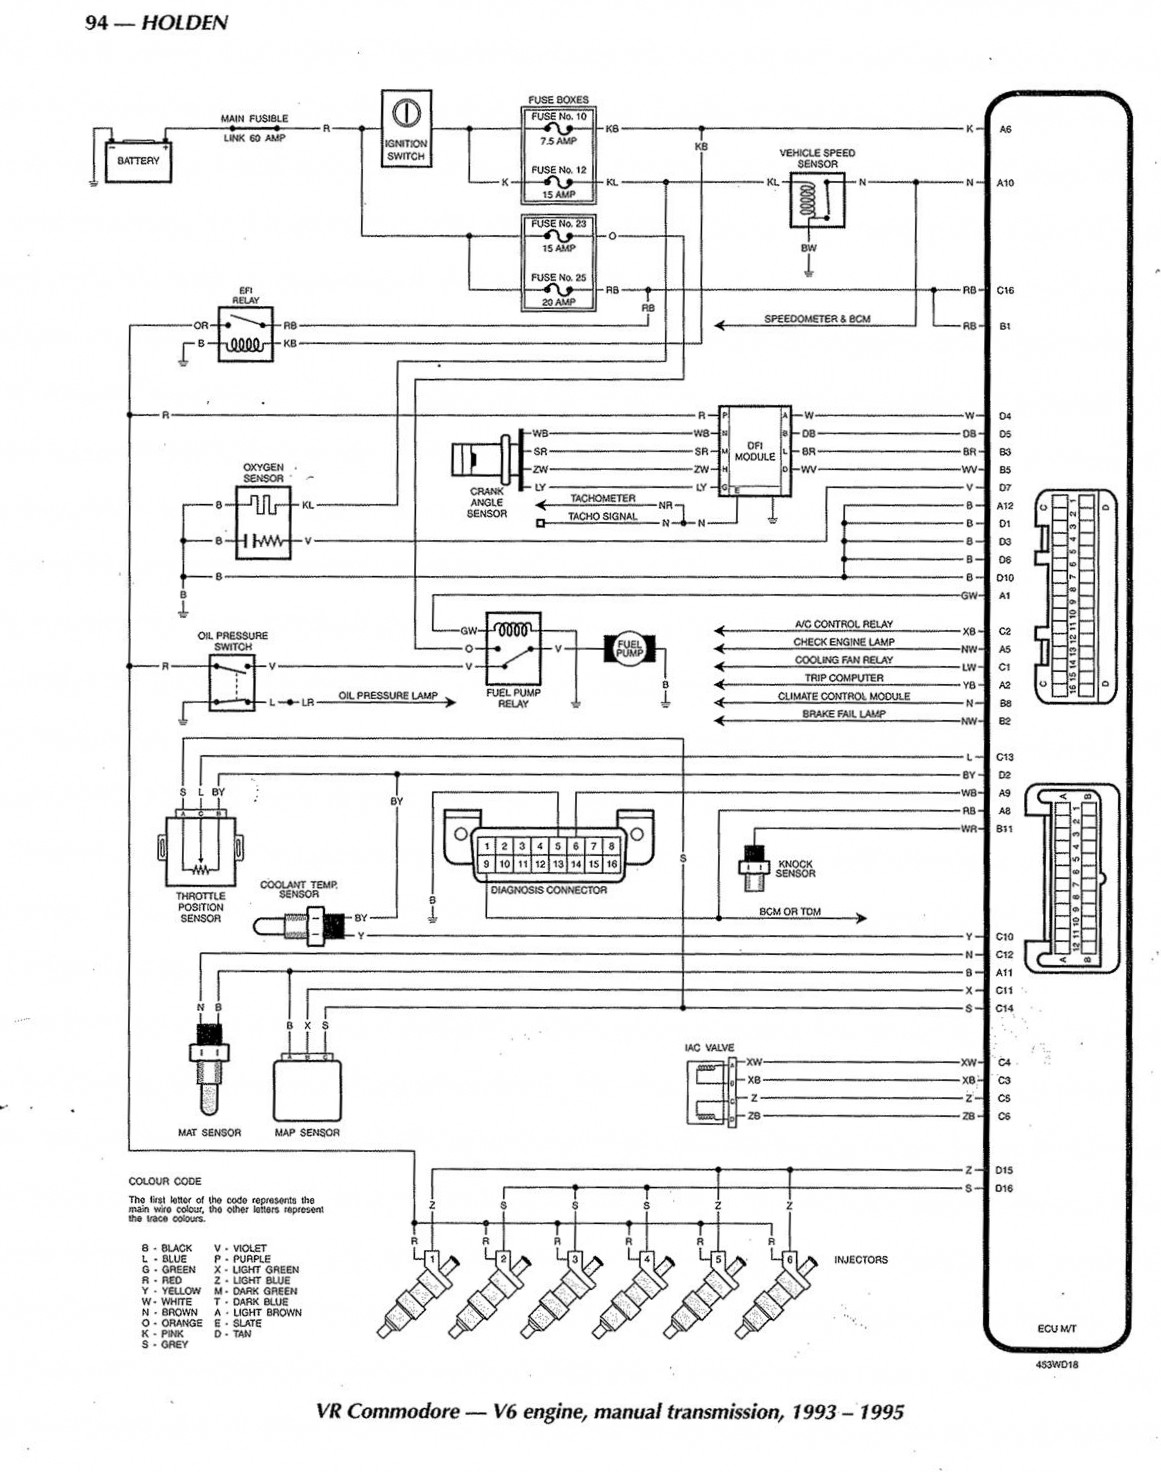 1993 VR Commodore Manual Transmission Wiring